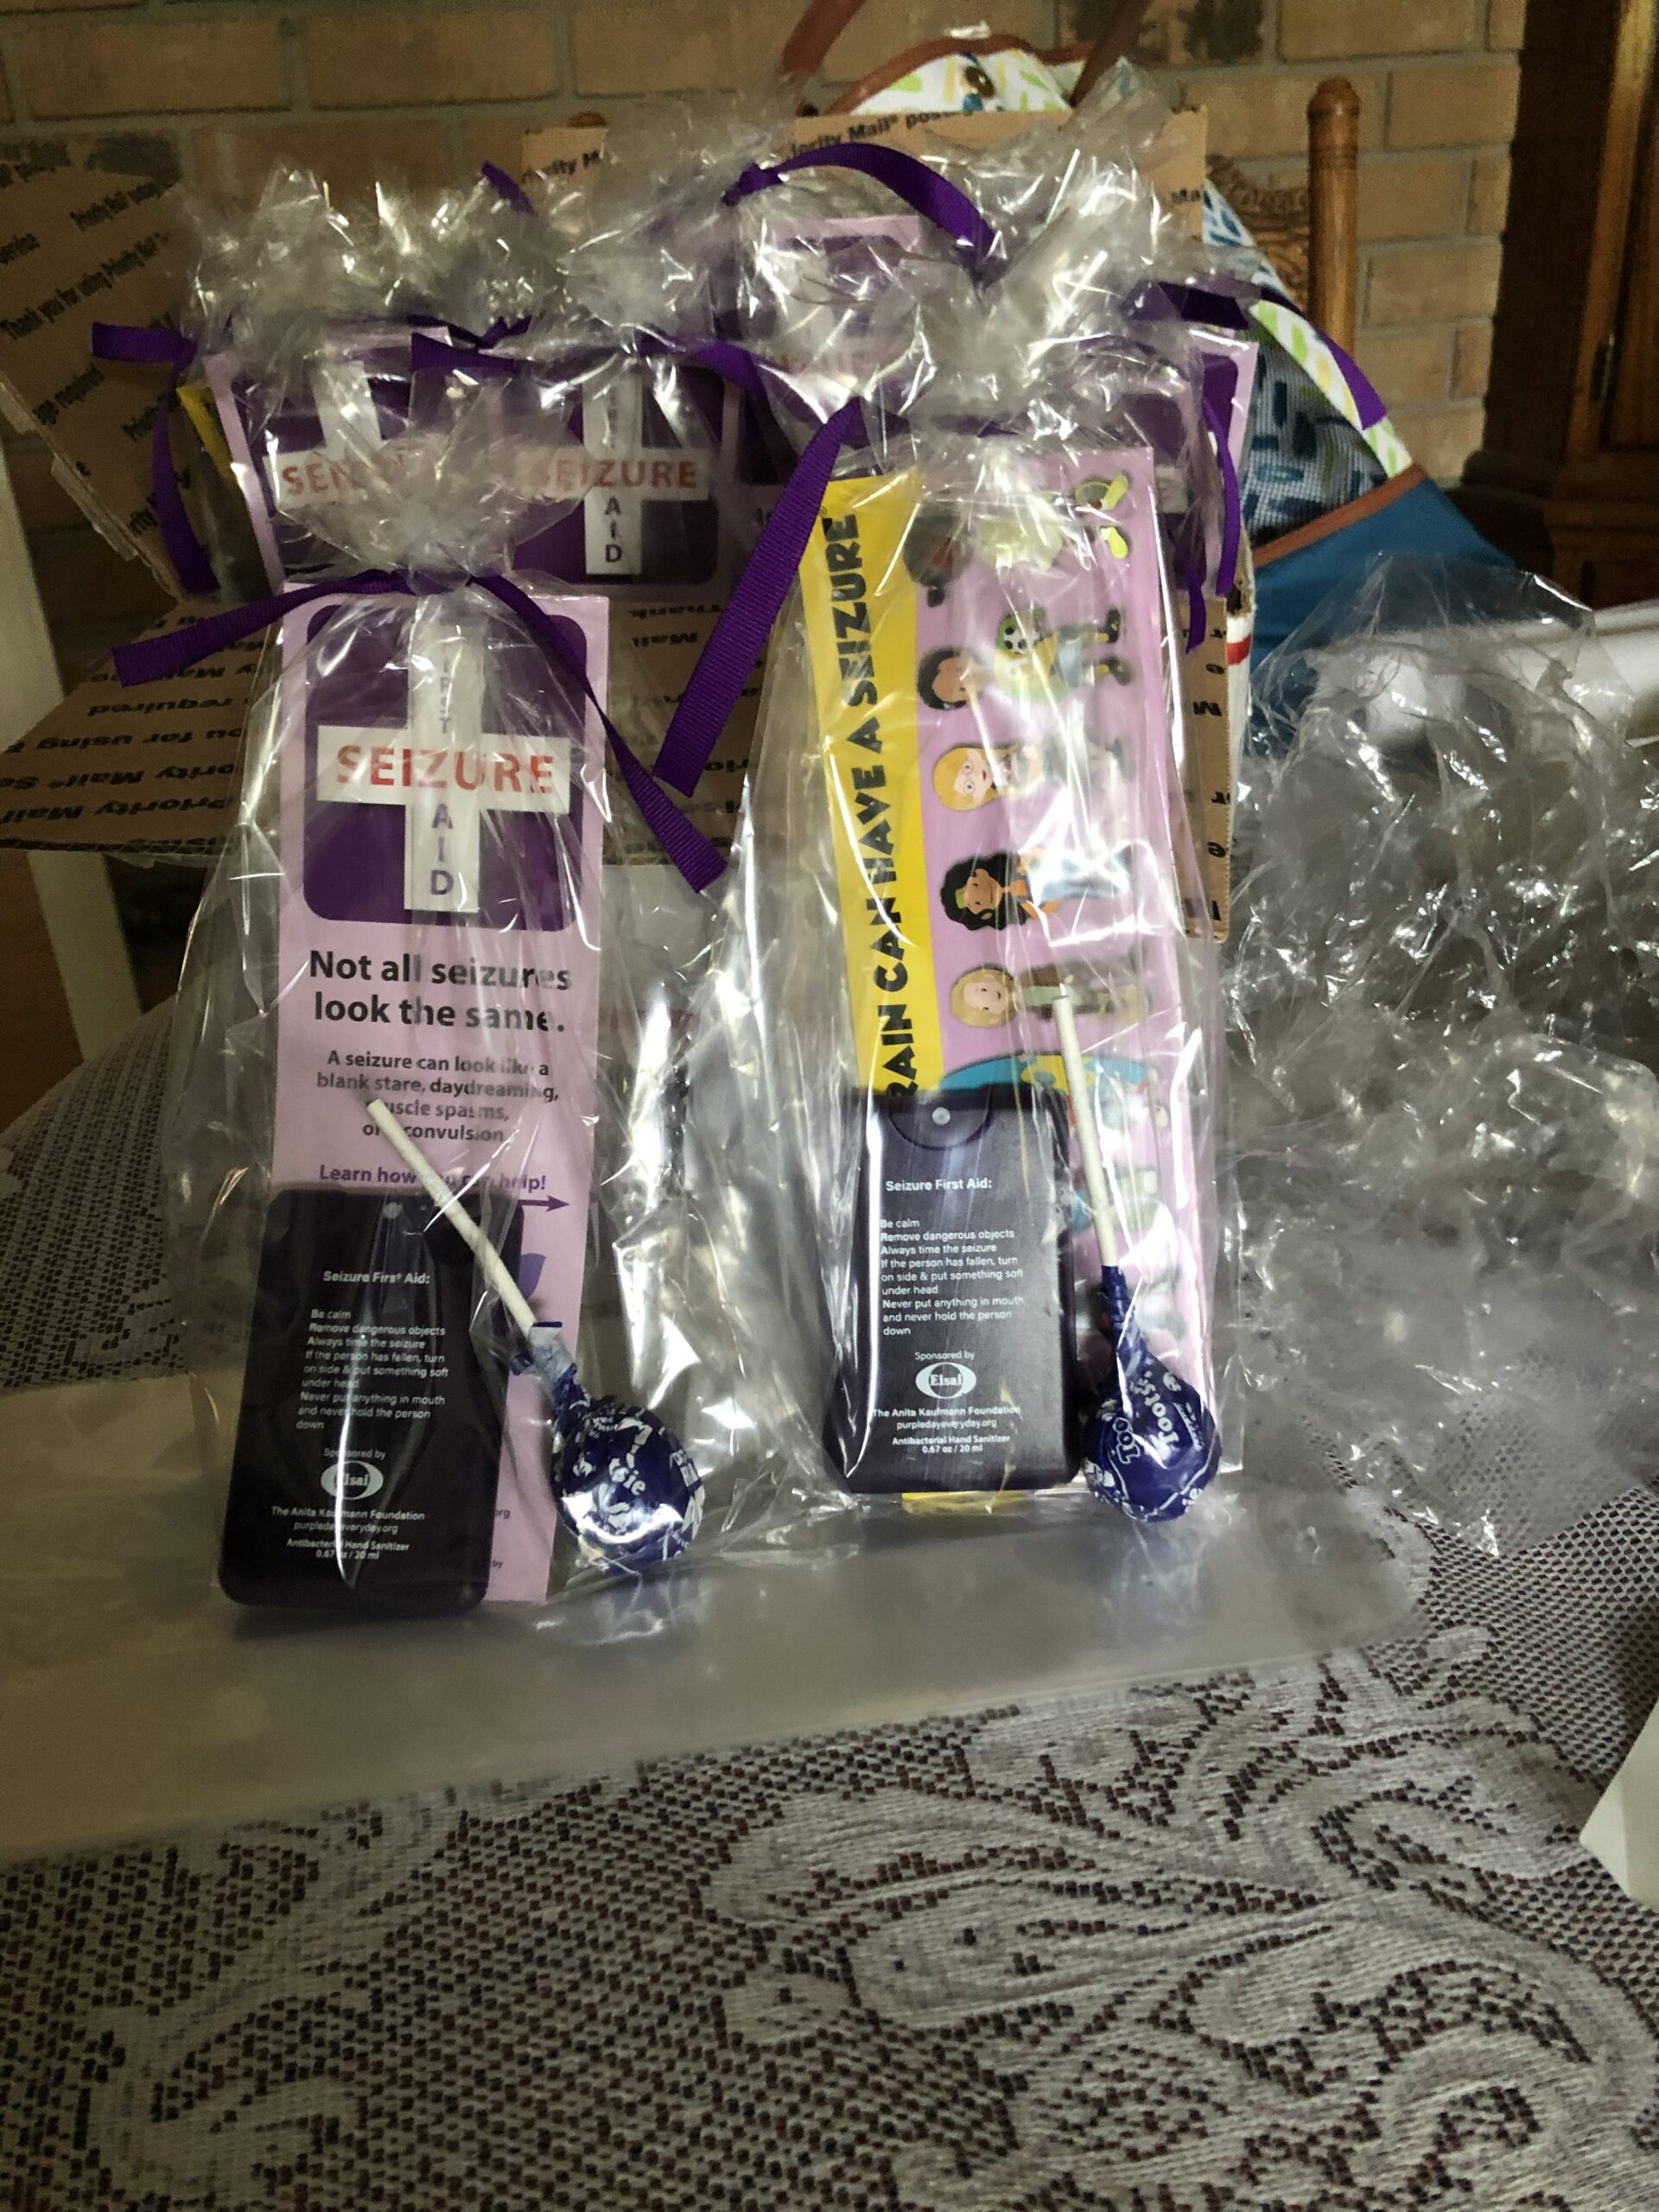 Goody bags for epilepsy awareness